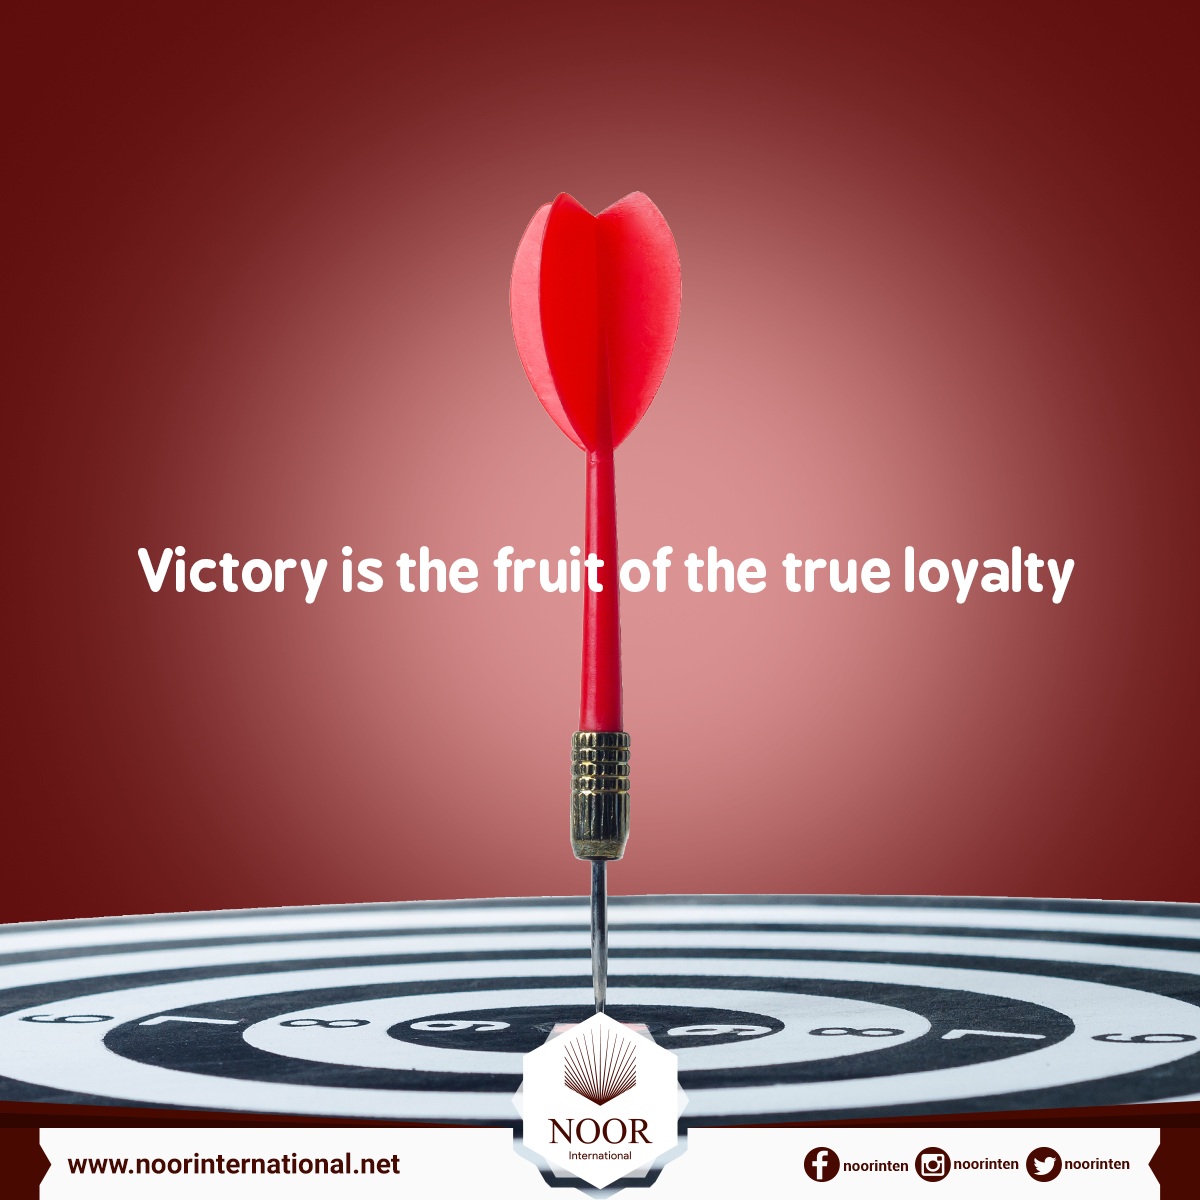 Victory is the fruit of the true loyalty